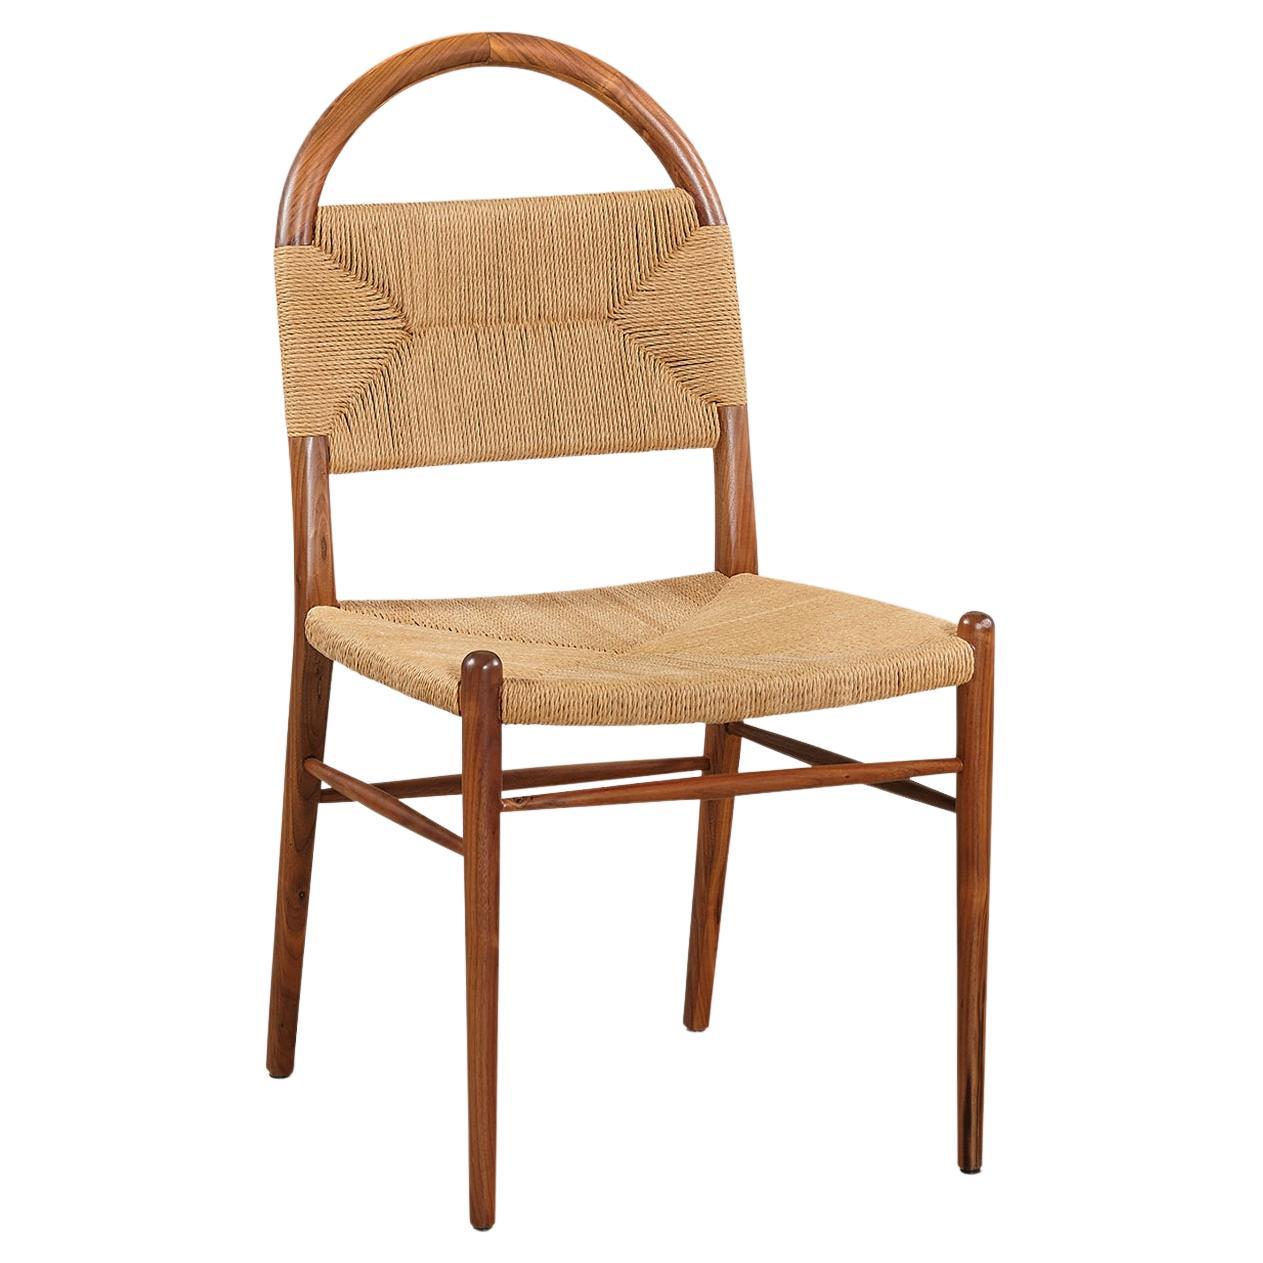 "Pernelle" Rush Weave and Walnut Dining Side Chair by Christiane Lemieux For Sale